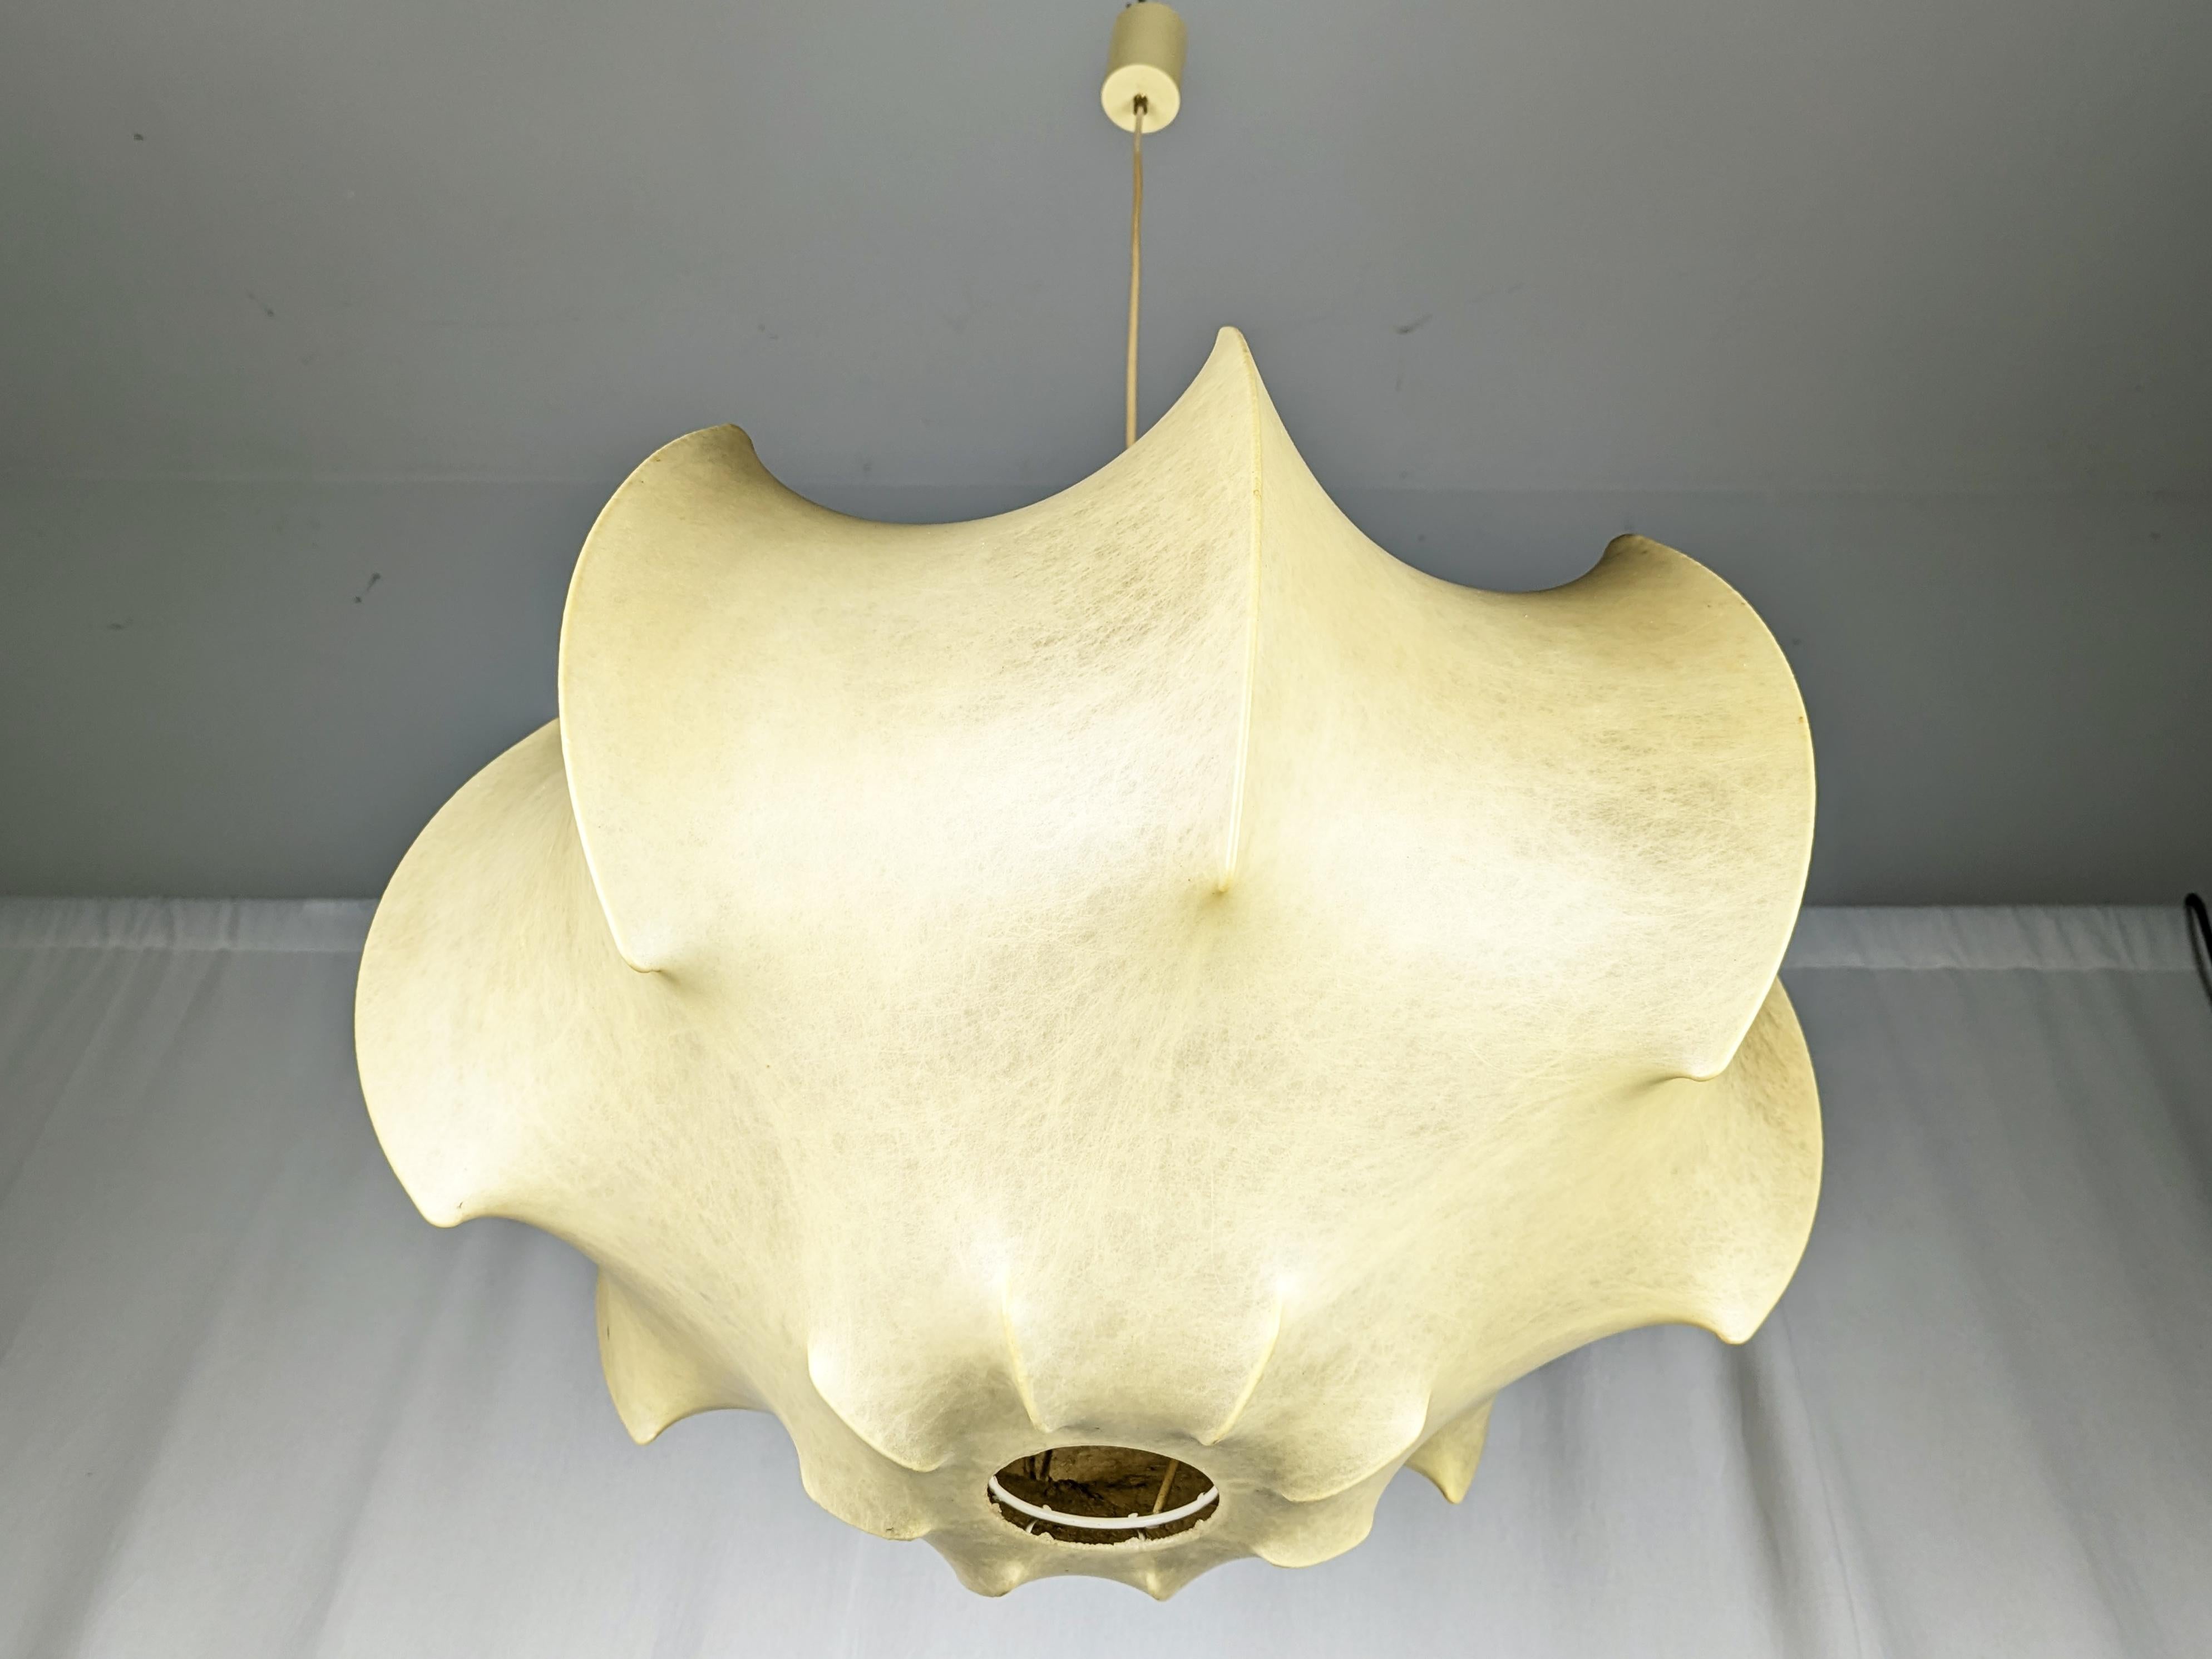 This pendant lamps named Viscontea, designed by Castiglioni Brothers in the early 1960s and produced by Flos.
The chandelier remains in pretty good overall condition: the yellowing of the cocoon is normal, consistent with the age of the